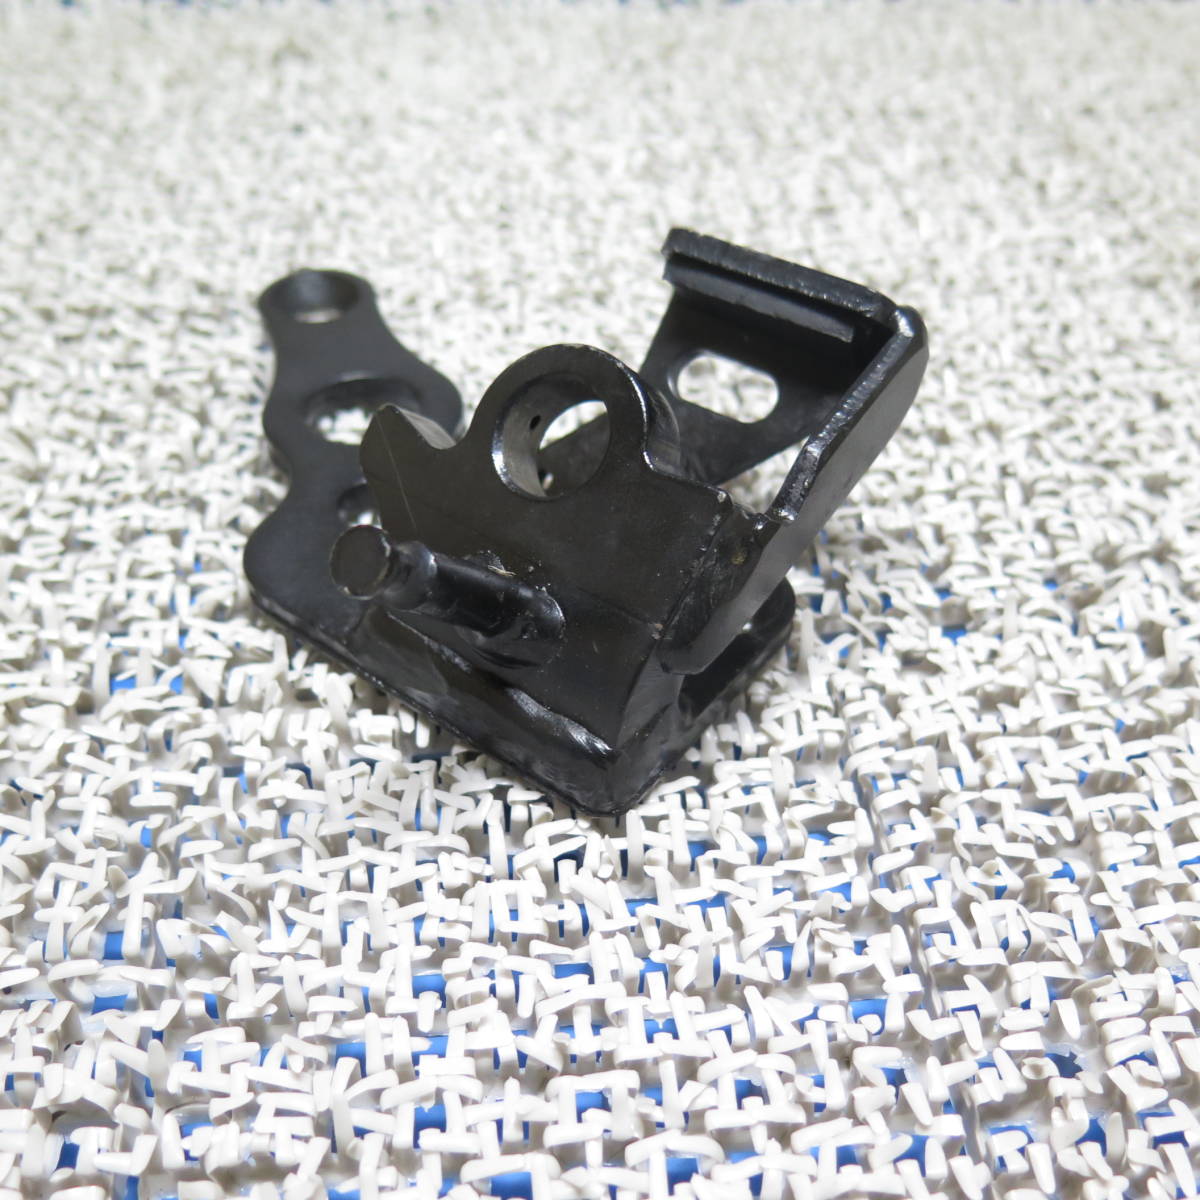 BMW R850 R1100 GS R RT RS S support bracket stand bearing stay 46522325381 original unused TR050423.78